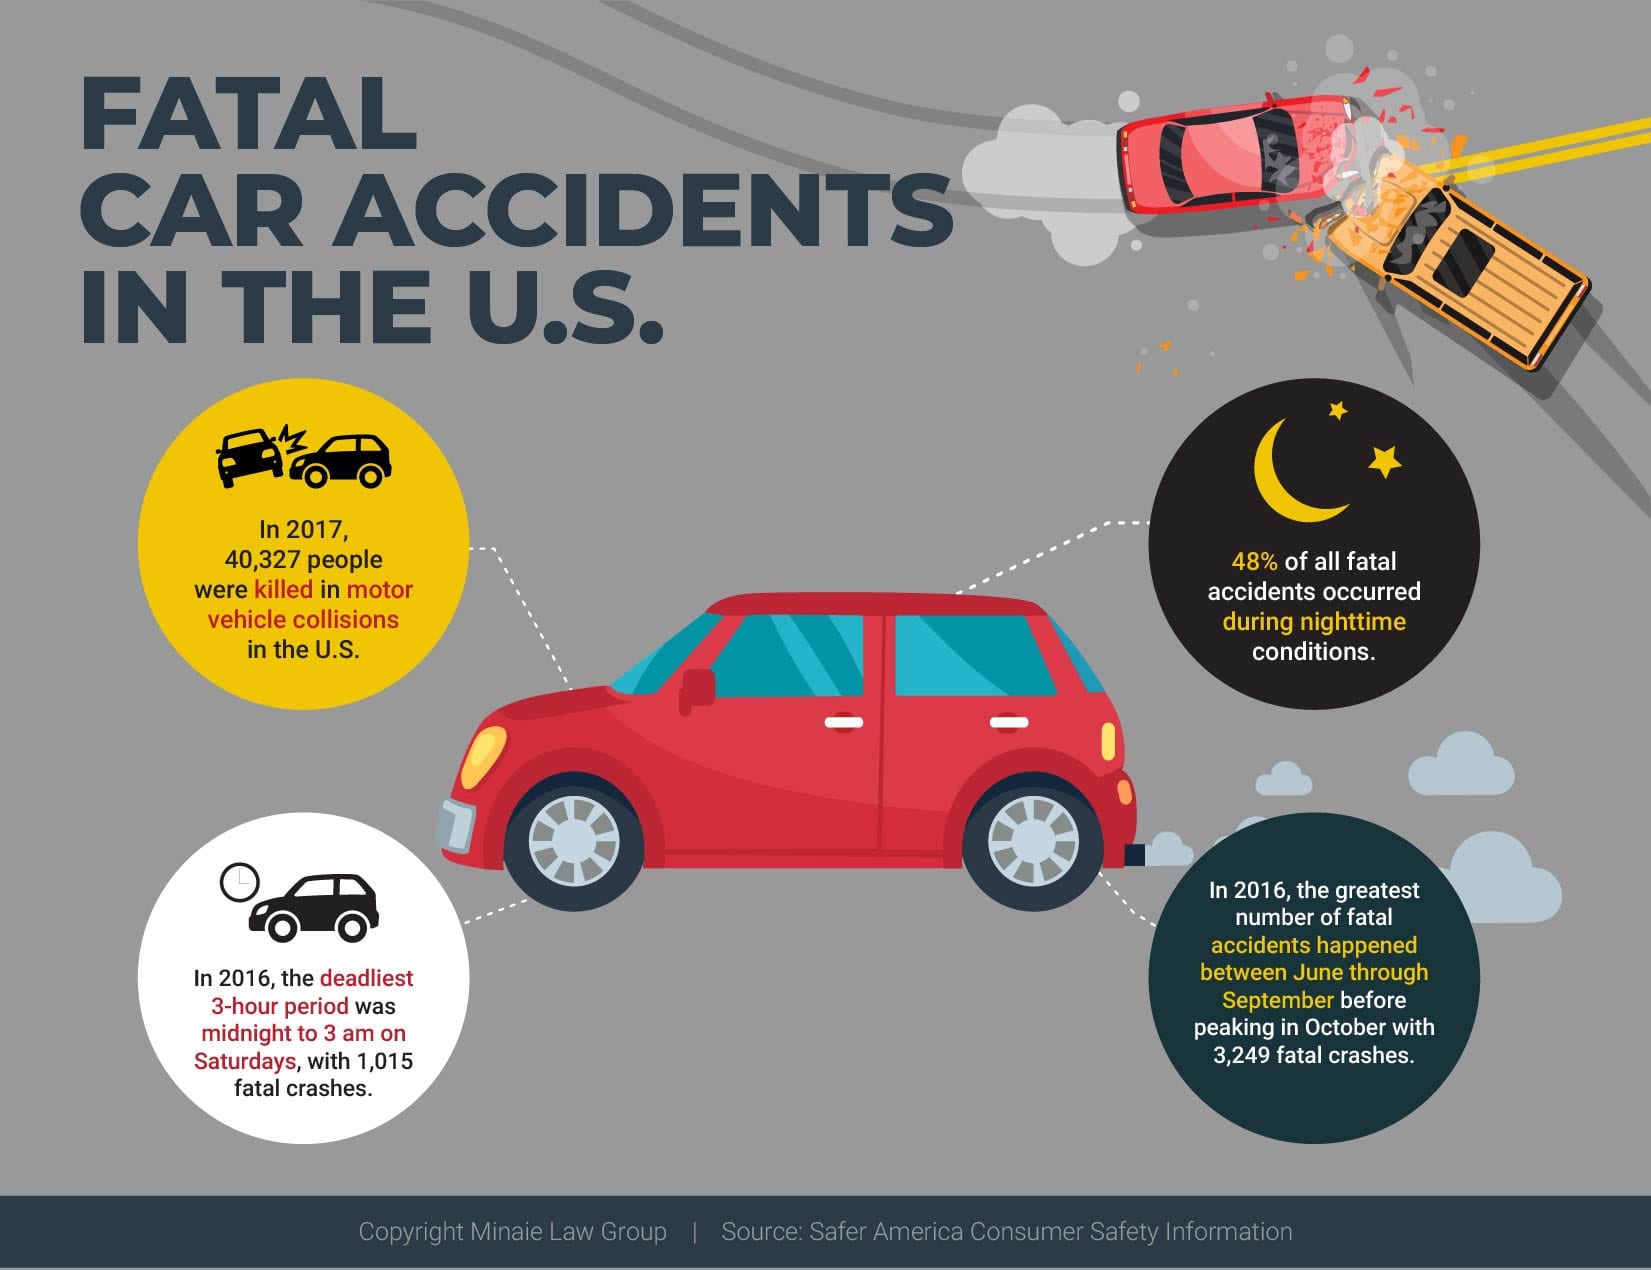 fatal car accidents in the U.S. per year - an infographic showing what causes fatal accidents